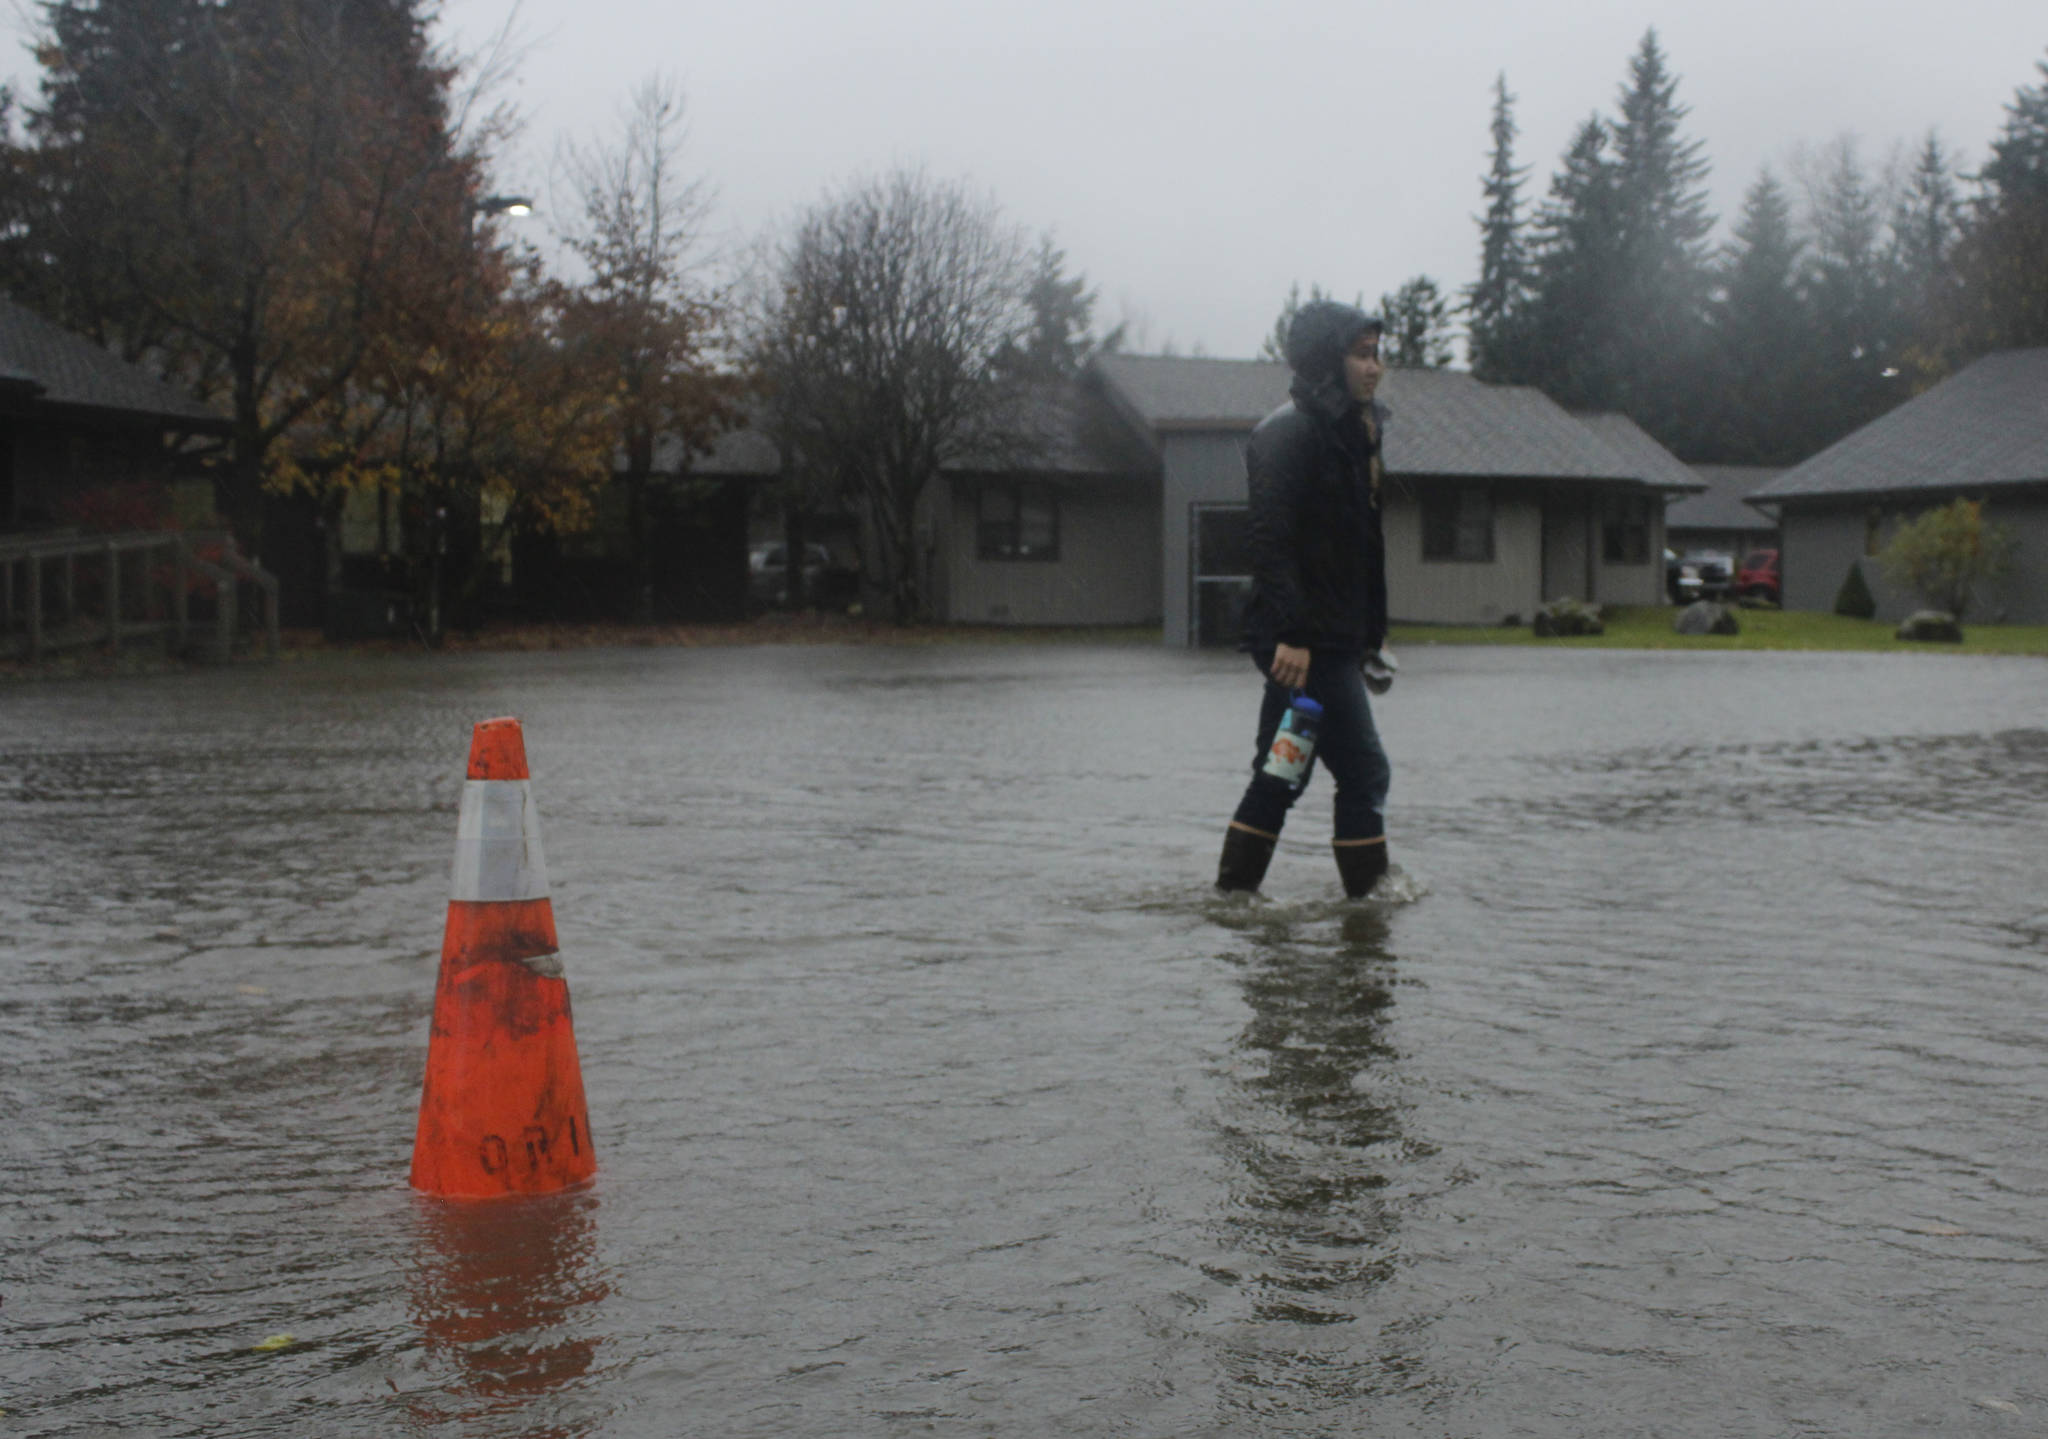 Juneau resident Amy Jenson walks through a flooded parking lot at the Jordan Creek Condominiums on the way to a chiropractor appointment on Friday, Oct. 27, 2017. (Alex McCarthy | Juneau Empire)